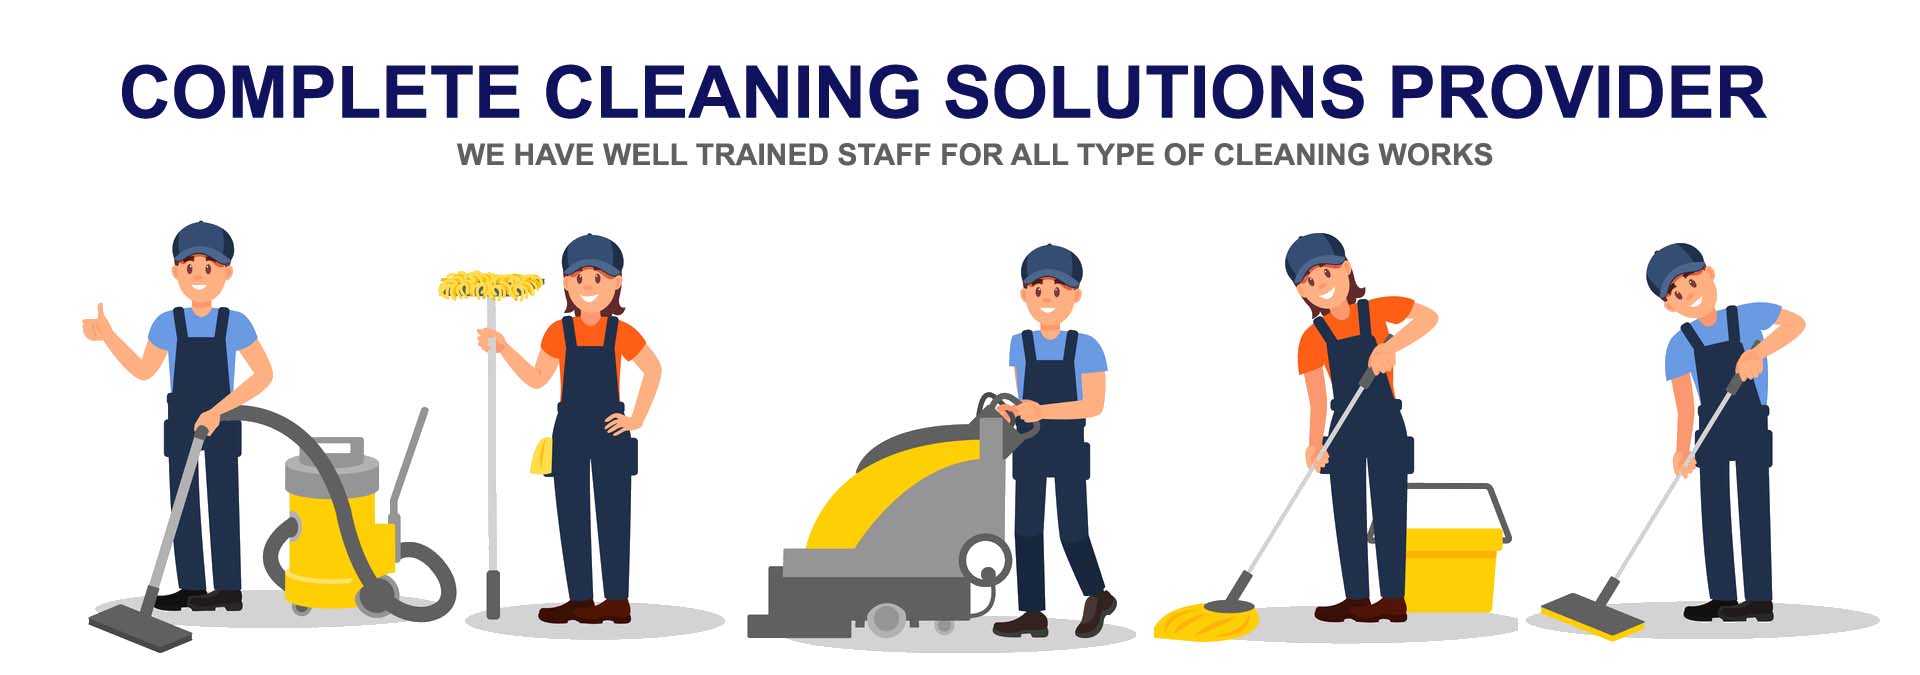 Wow-Cleaning-Janitorial-staff-Slide1.jpg